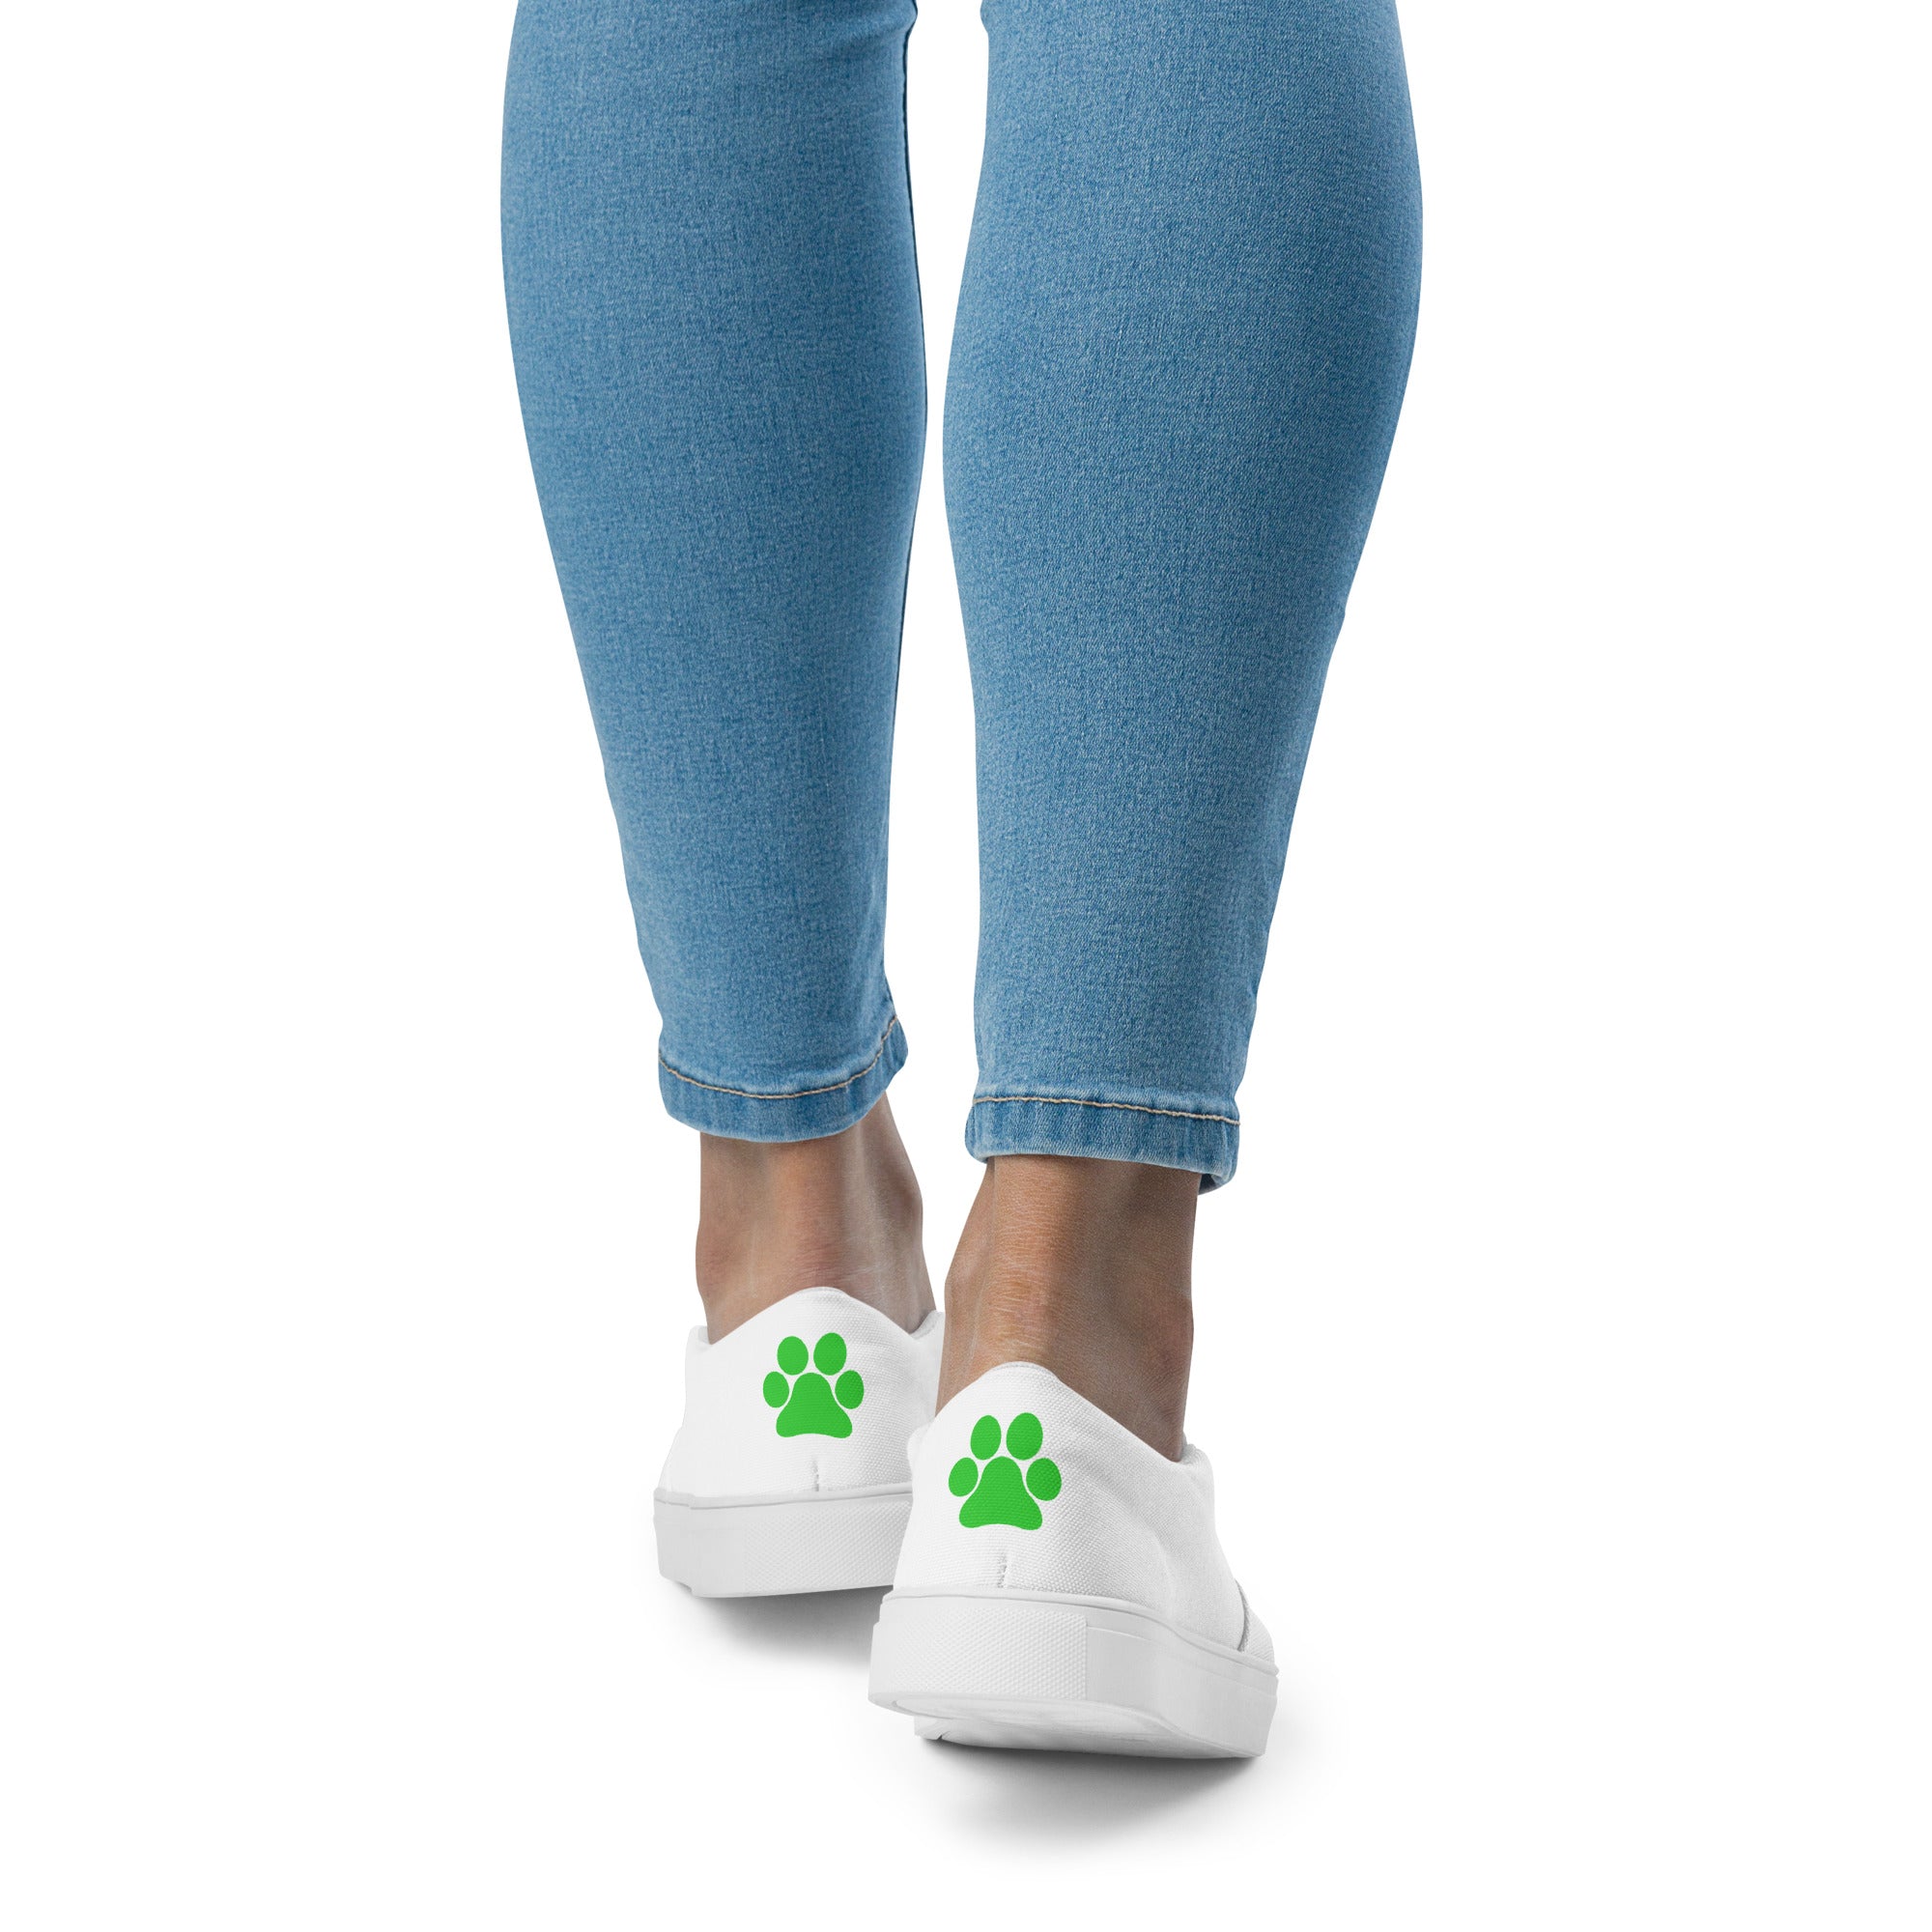 Women’s slip-on Lime Paw shoes